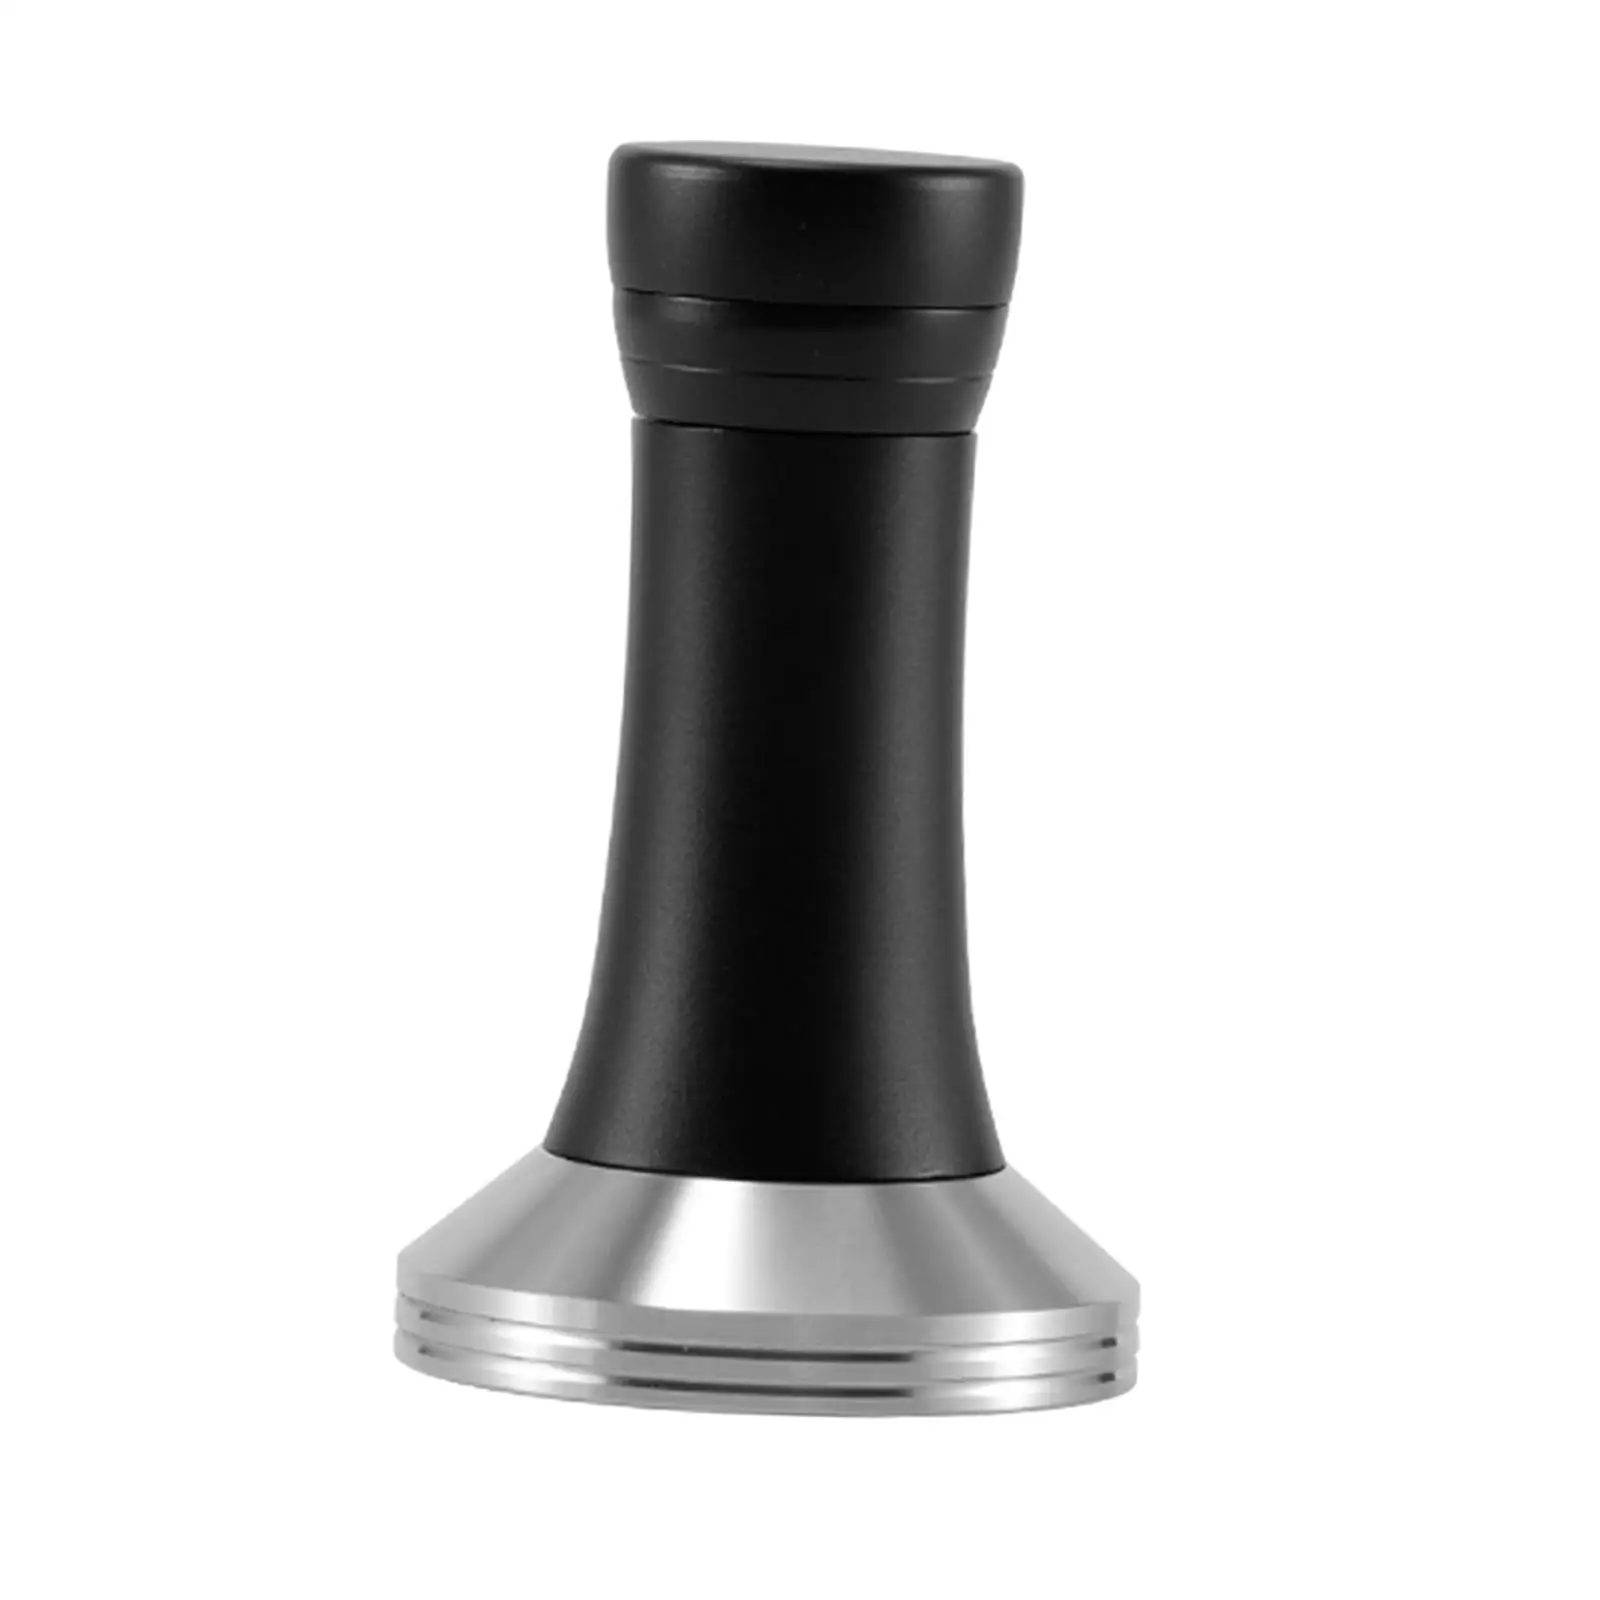 Coffee Distributor and Tamper Espresso Tamper Aluminum Alloy Espresso Hand Tampers for Restaurants Hotel Gifts for Coffee Lovers